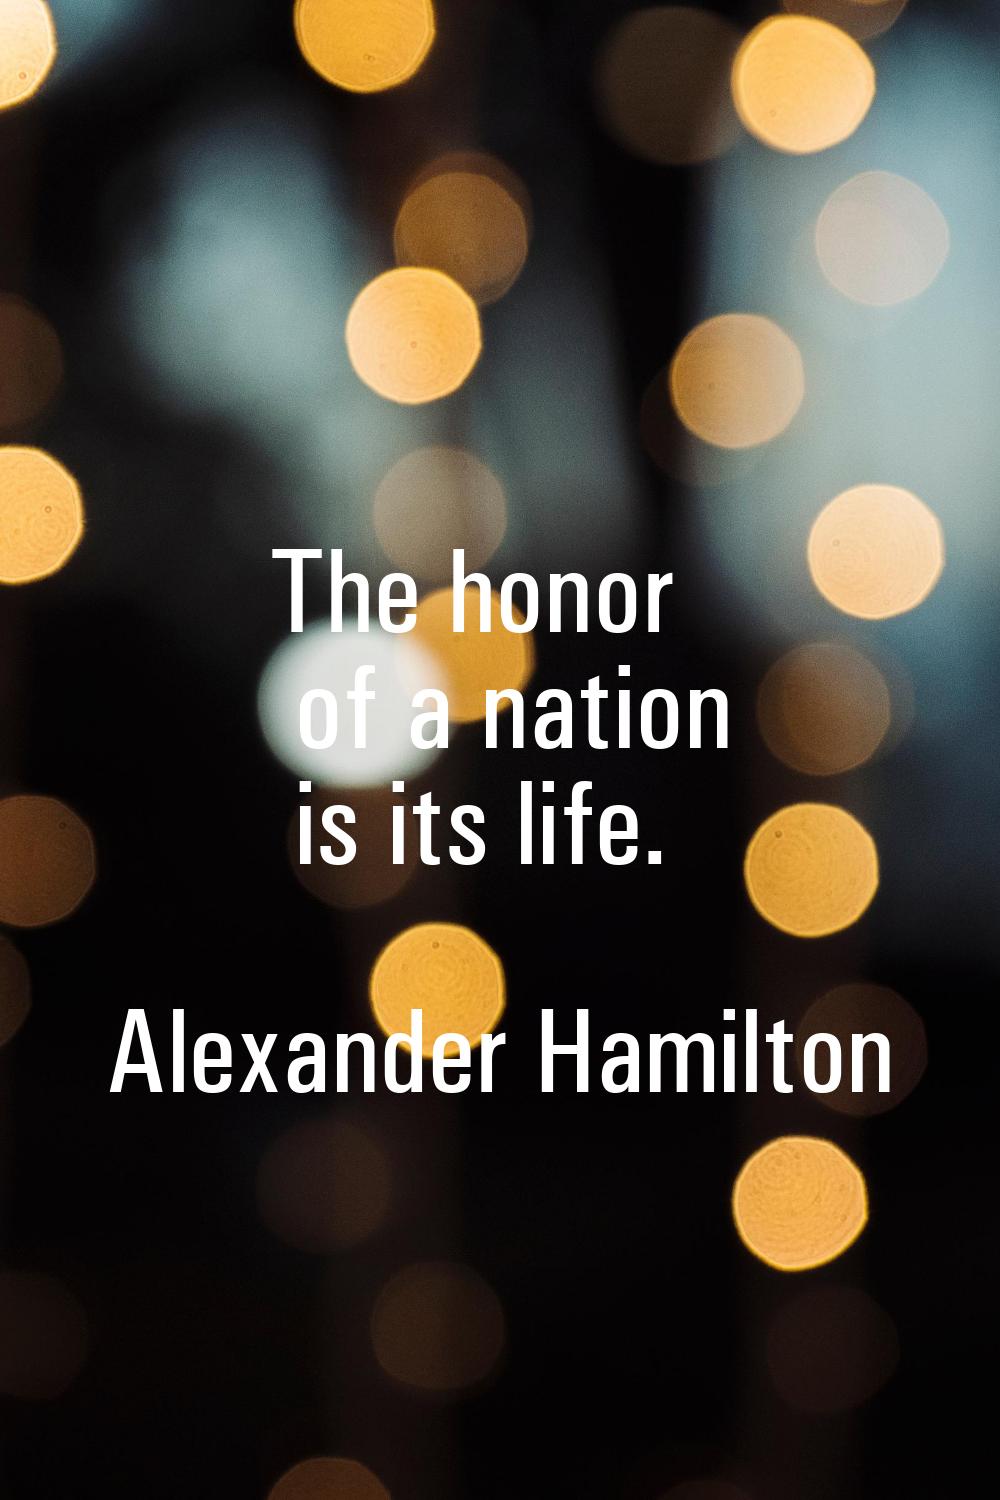 The honor of a nation is its life.